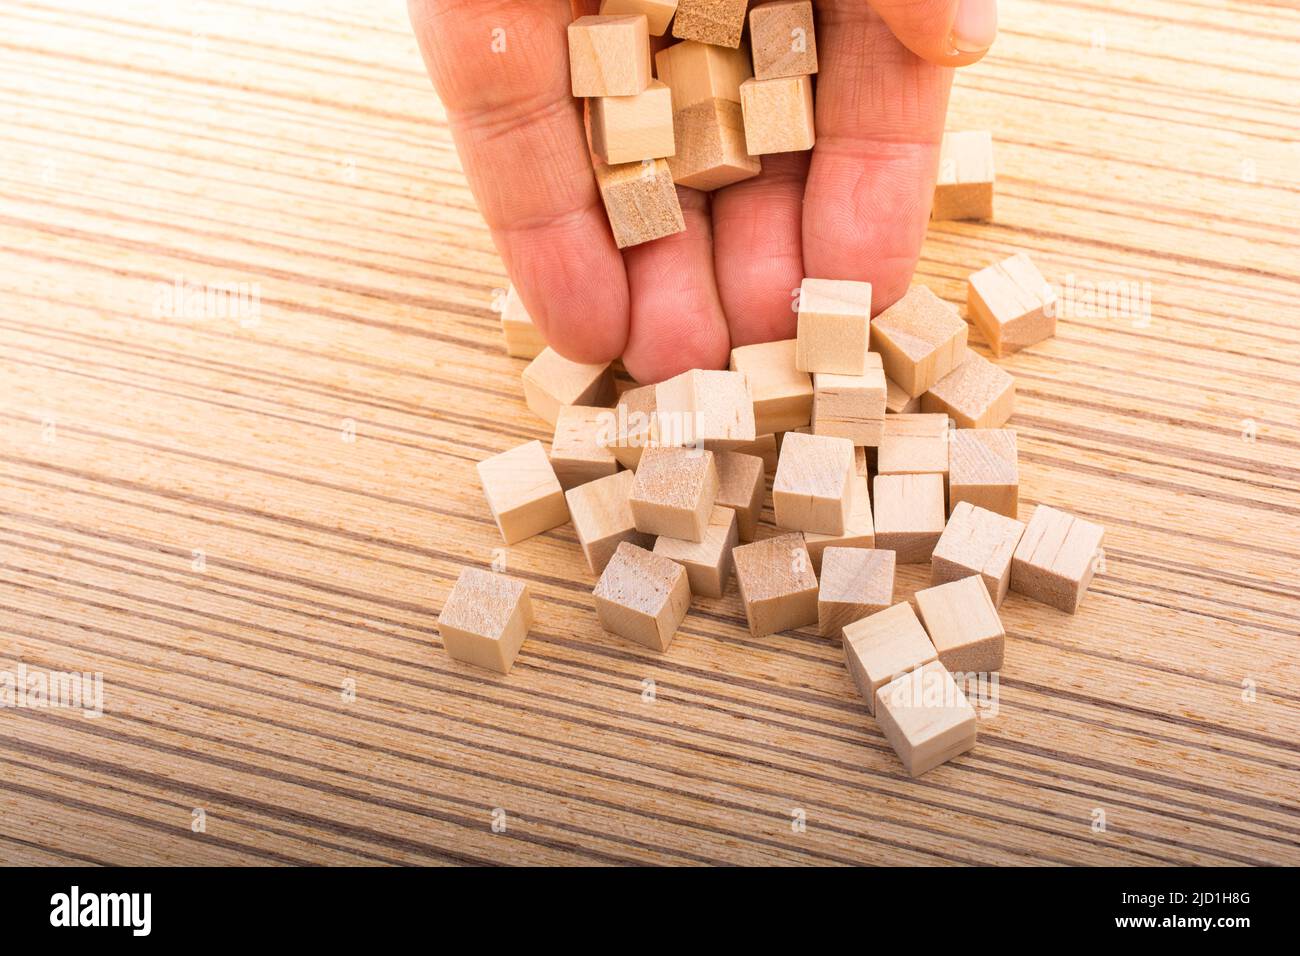 Hand playing with wooden cubes as educational and business concept Stock Photo